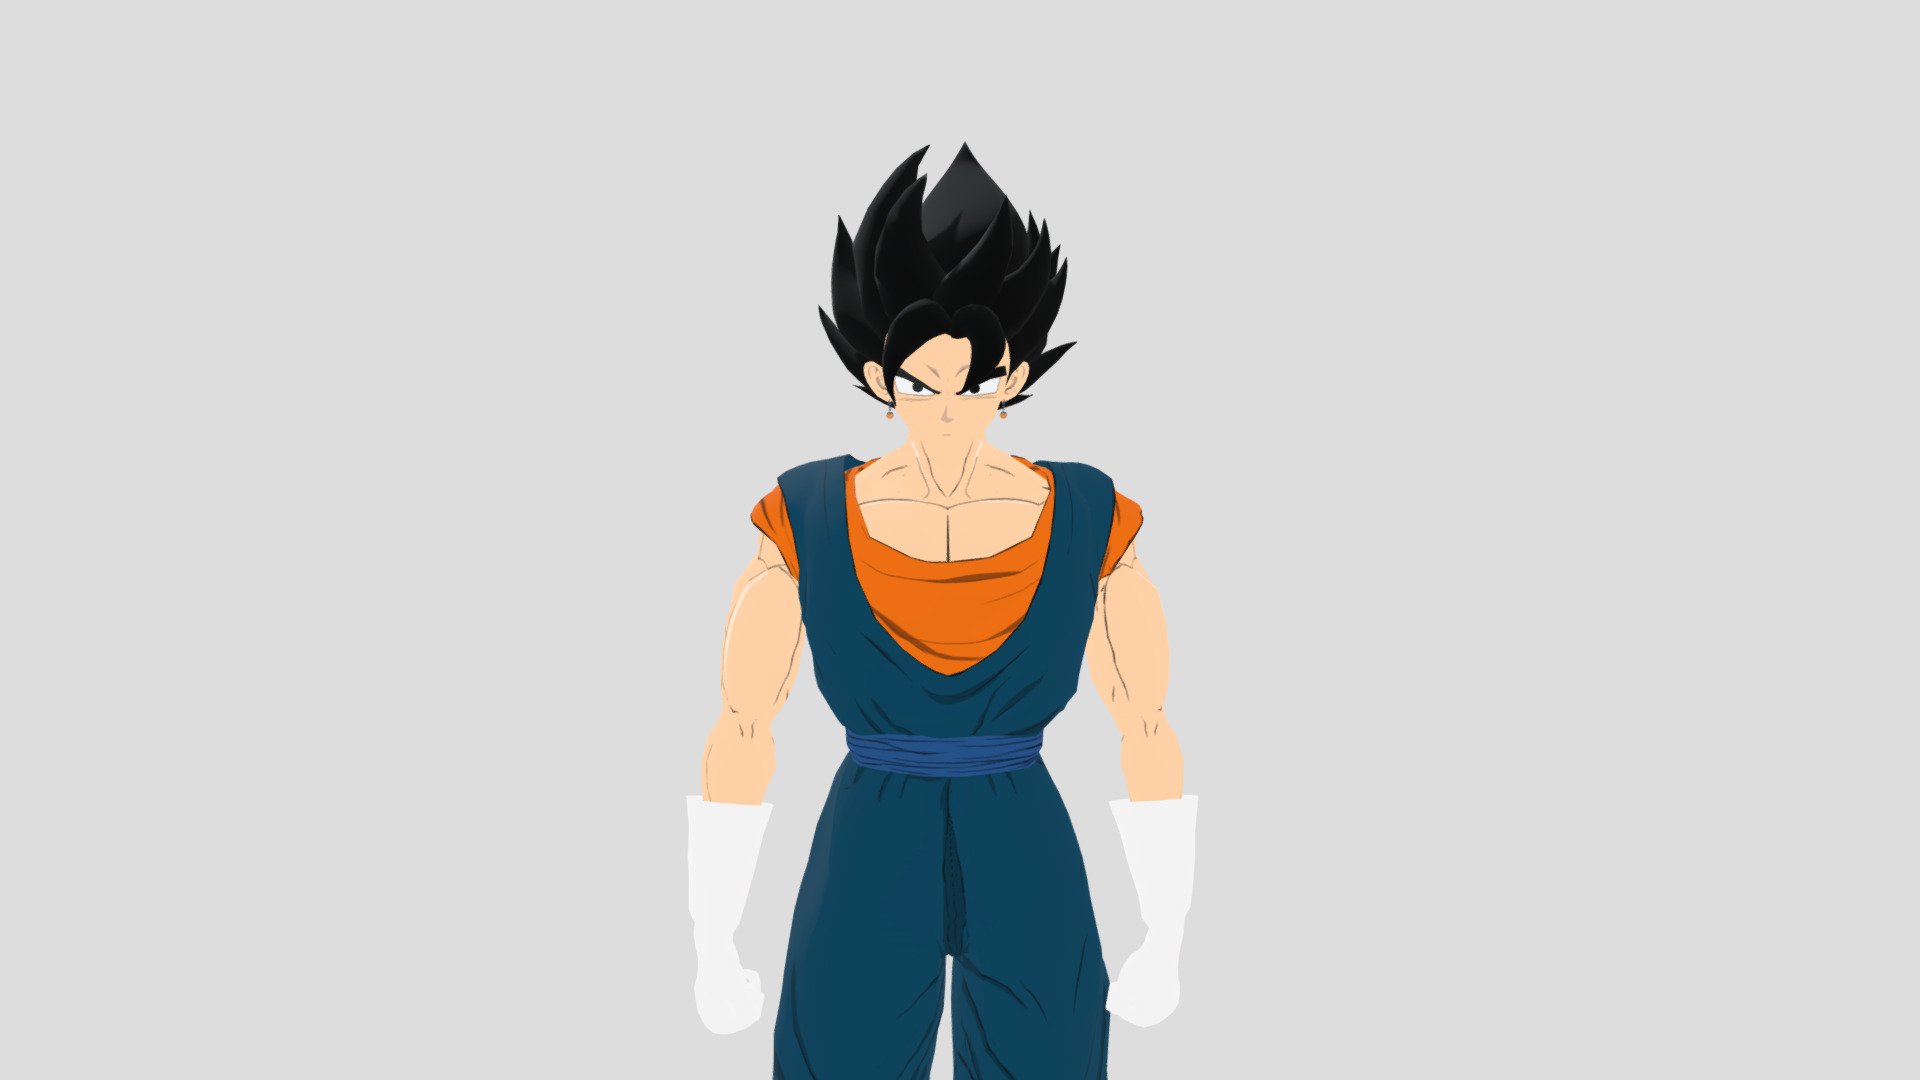 3D rigged Model of Vegito from Dragonball Z and Super franchises

All Forms Included

Shape-keys for hair forms and facial expressions

Game-ready and avaiable in both .blend and .fbx file formats

Low-Medium poly

includes all textures

.blend includes a Cel-Shaded Version

Available here

https://www.artstation.com/flamelex/store




Model Specfications
Objects : 20
Faces : 15,339
Vertcies : 15,809
Triangles: 30,505
Bones: 190
Textures: 17
Textures dimensions: between 2048x2048 and 4072x4072 (depending on the object) - Vegito Model Rigged - 3D model by Flamelex 3d model